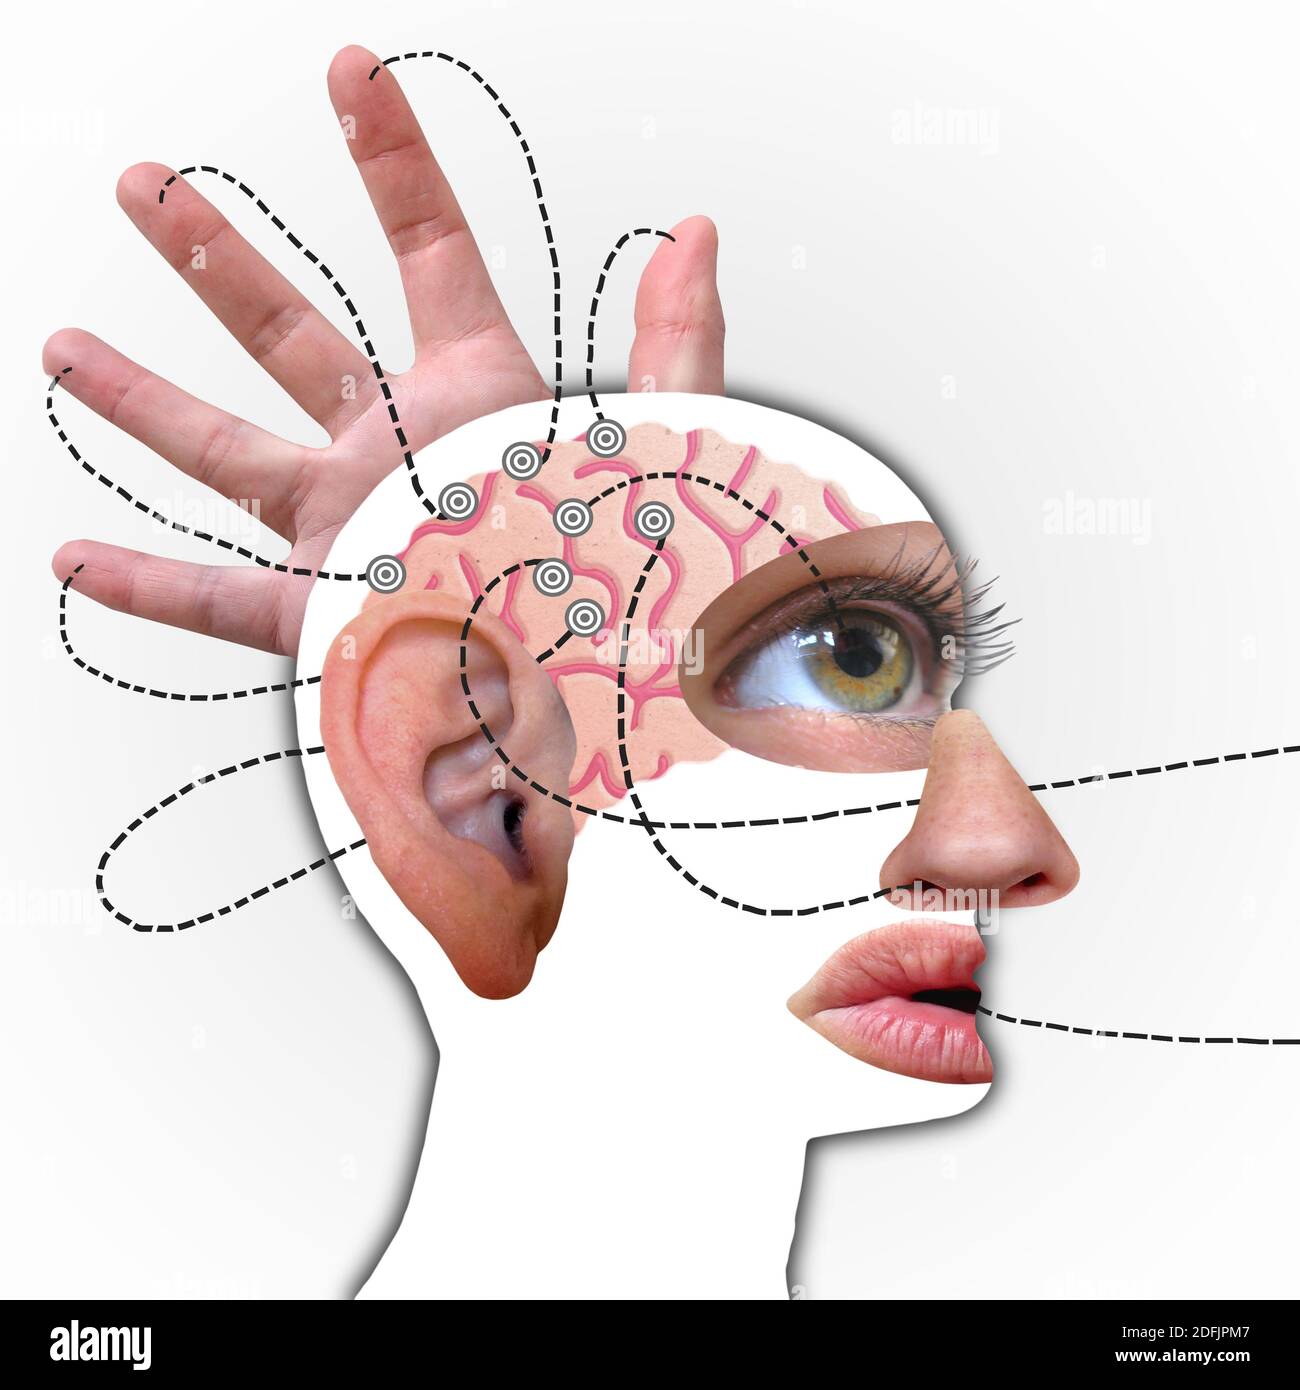 Human's brain profile, Connected to Five Senses - funny Collage Stock Photo